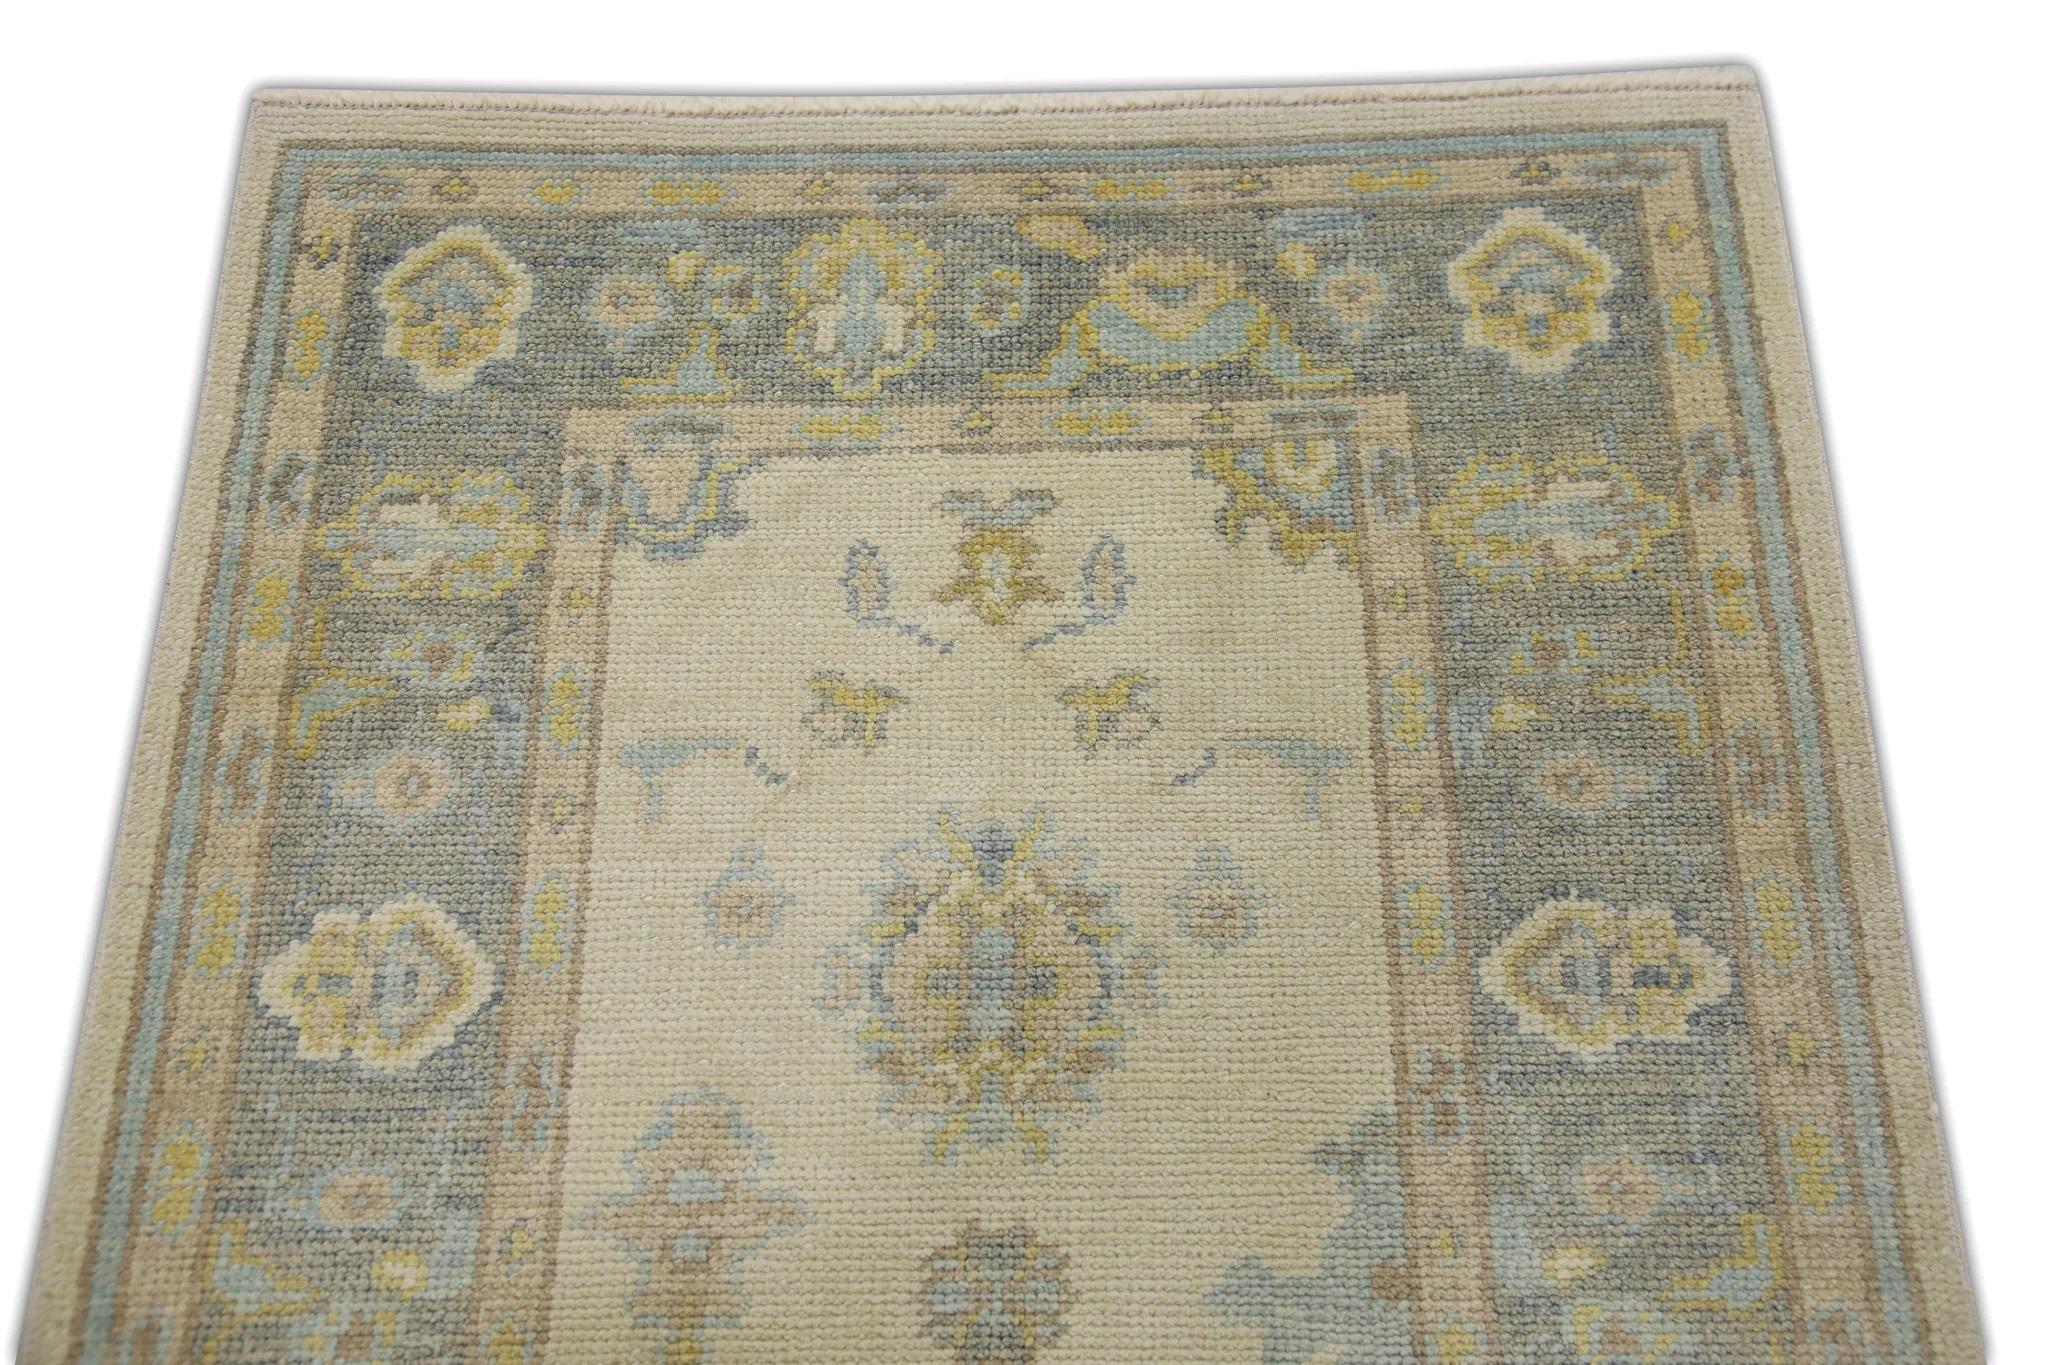 Vegetable Dyed Blue and Yellow Handwoven Wool Floral Design Turkish Oushak Rug 3' x 7'10